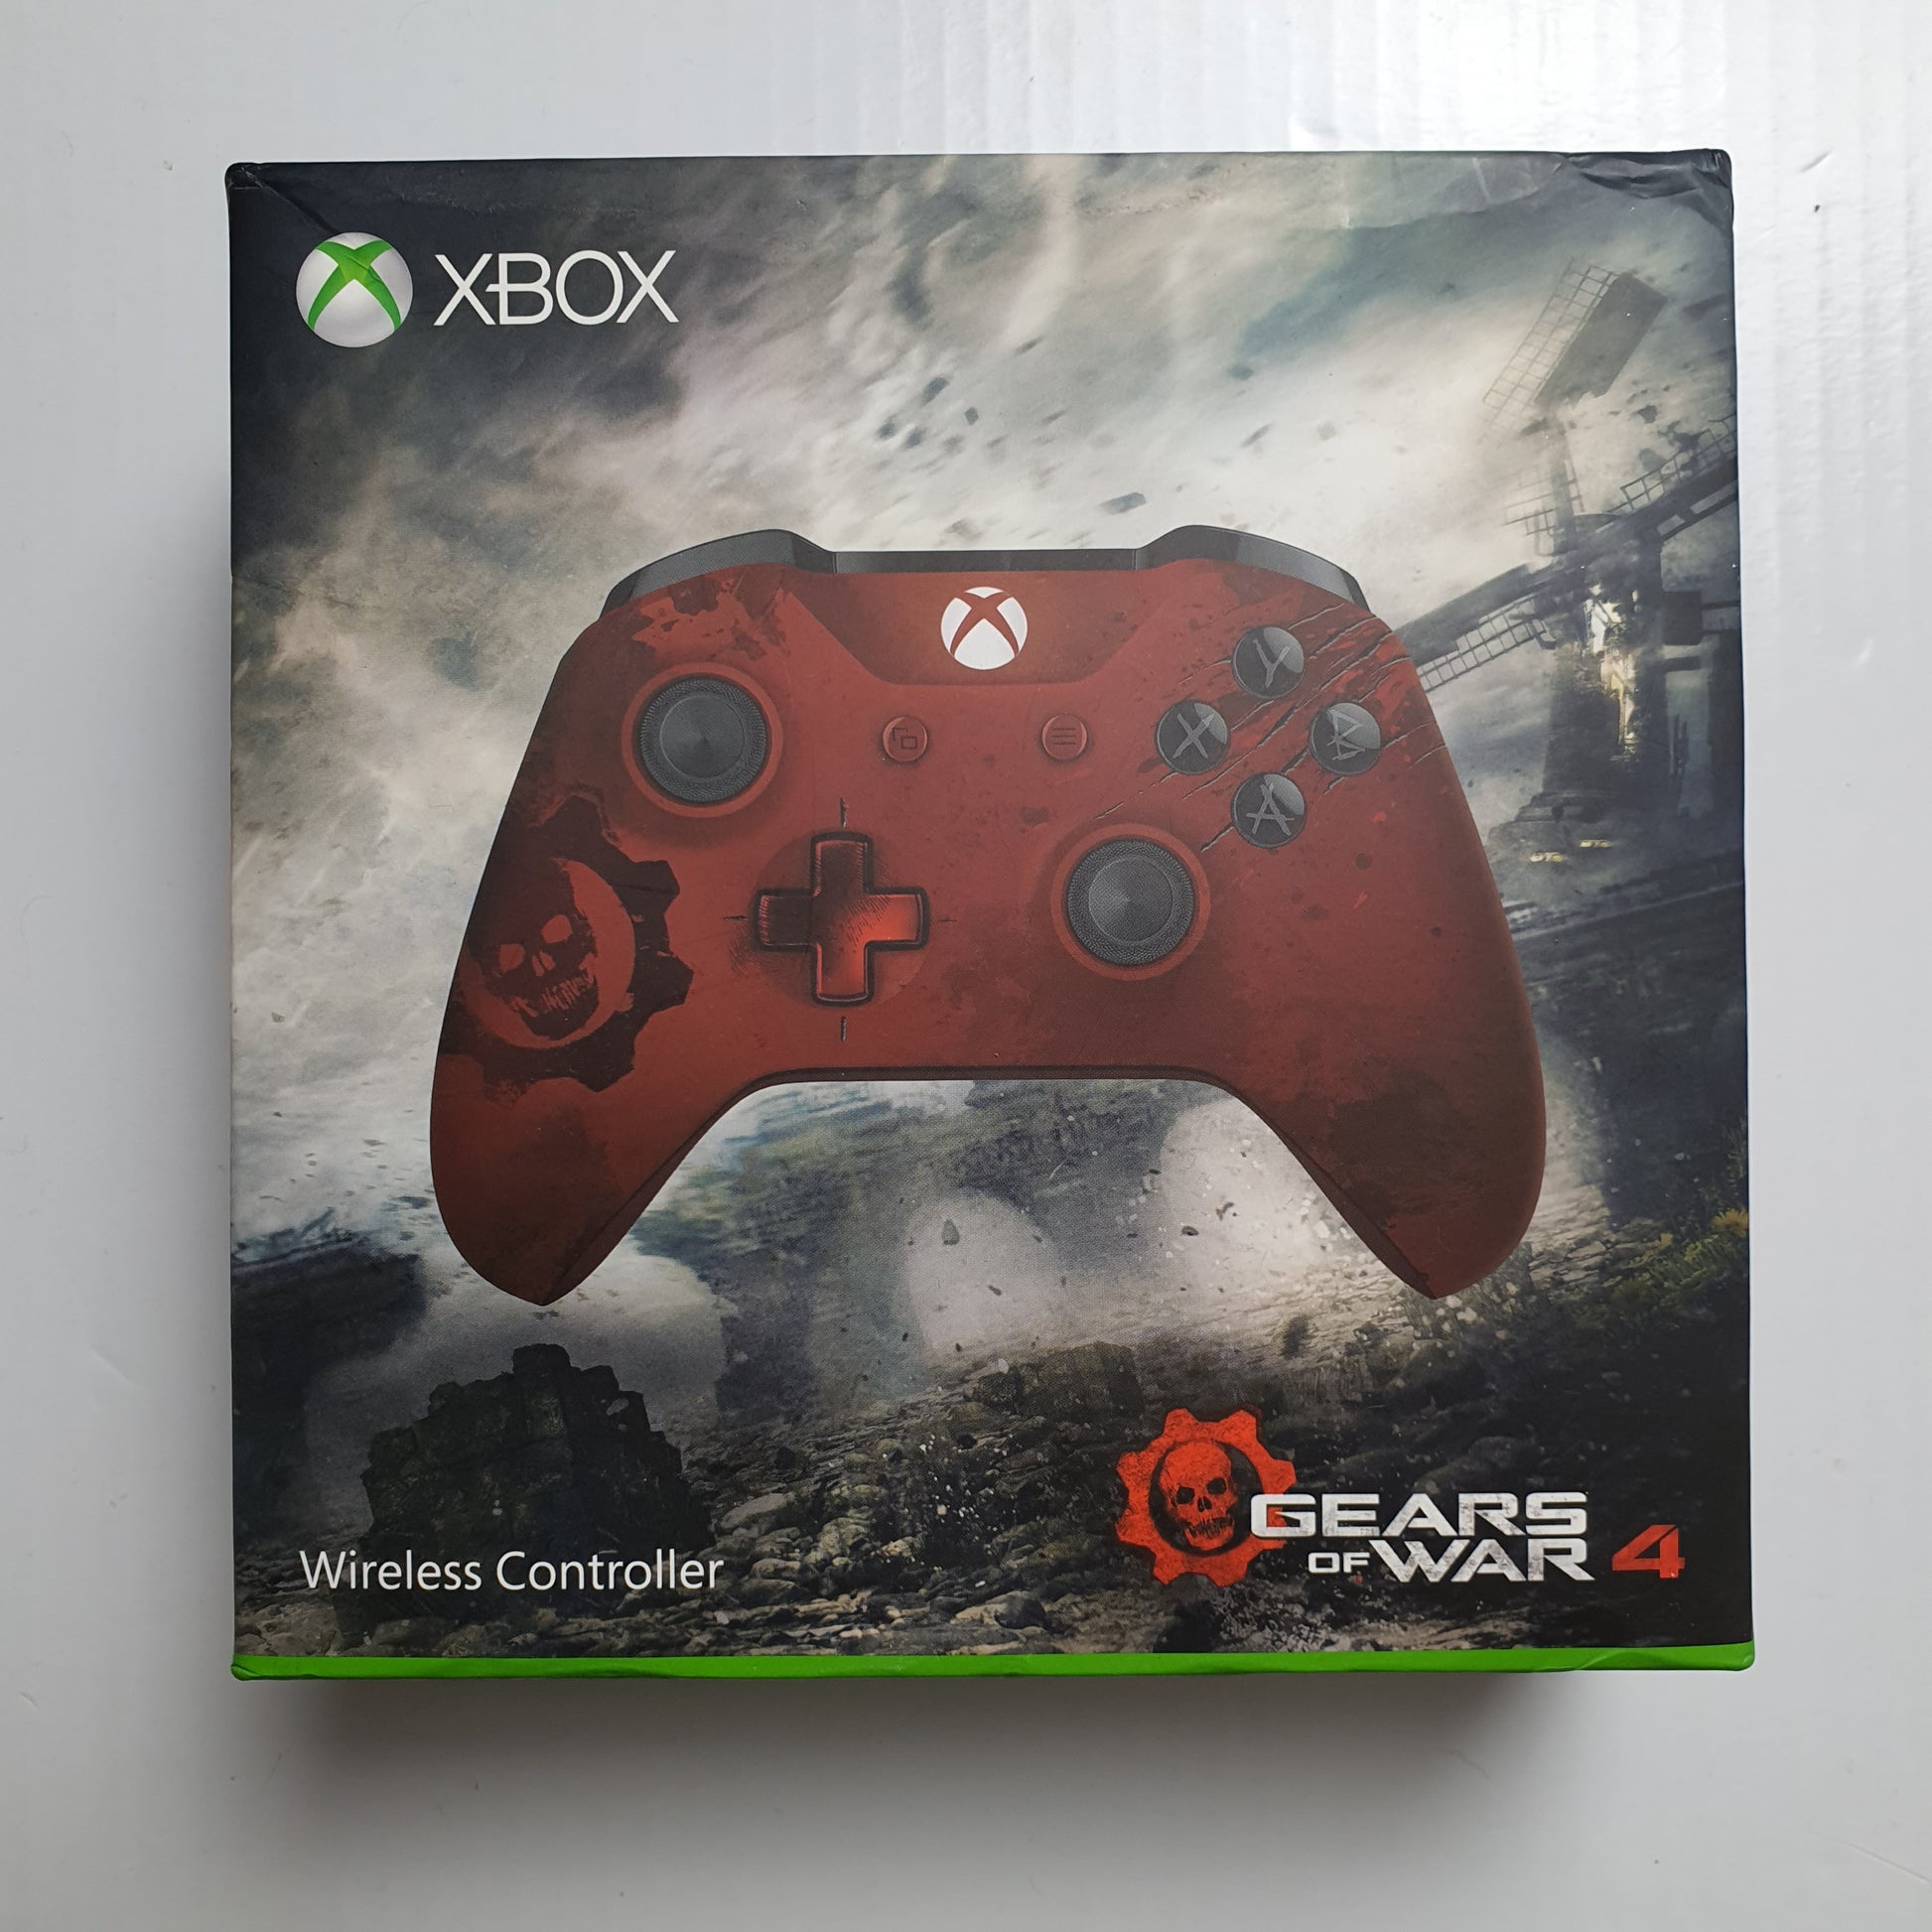 Xbox One S Gears of War 4 Limited Edition Review